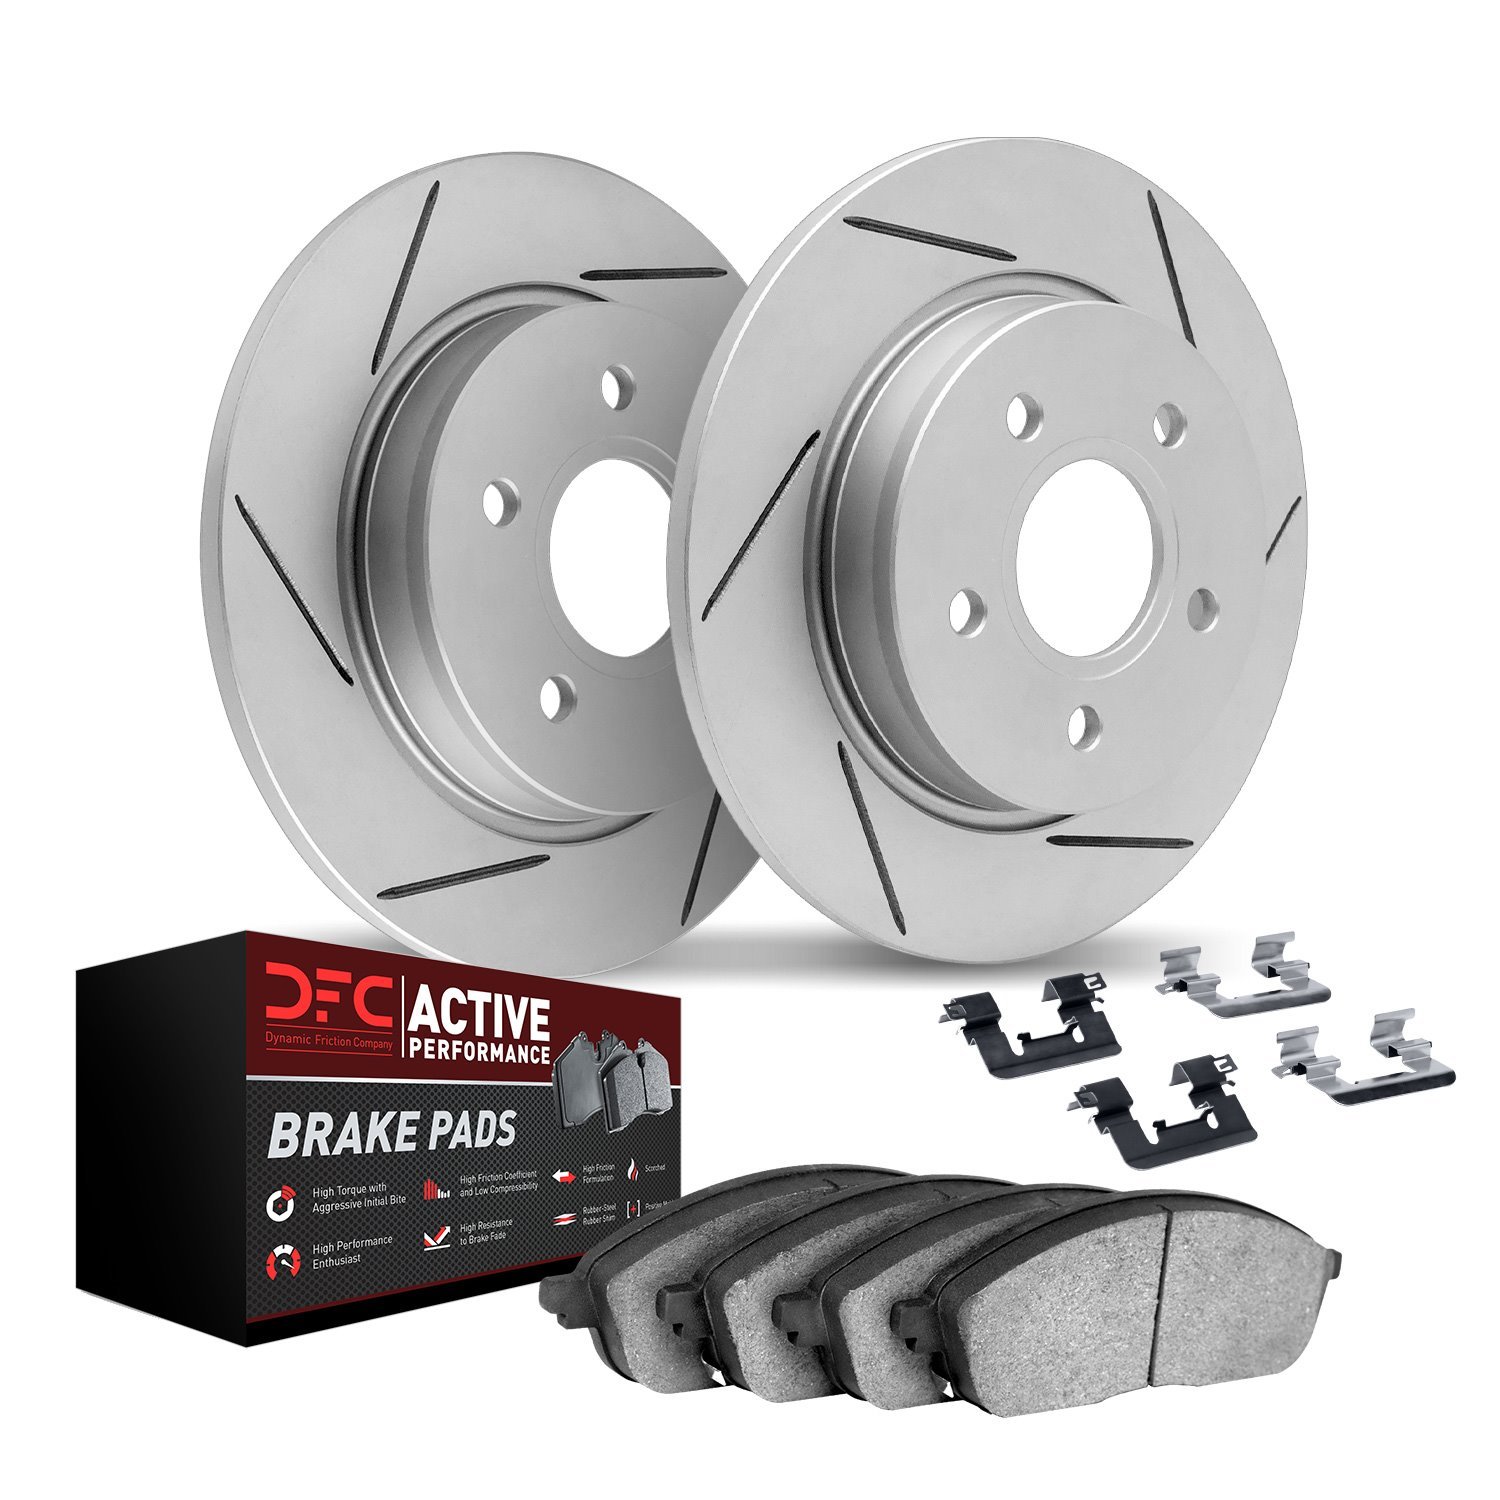 2712-74027 Geoperformance Slotted Brake Rotors with Active Performance Pads Kits & Hardware, 1999-2015 Audi/Volkswagen, Position